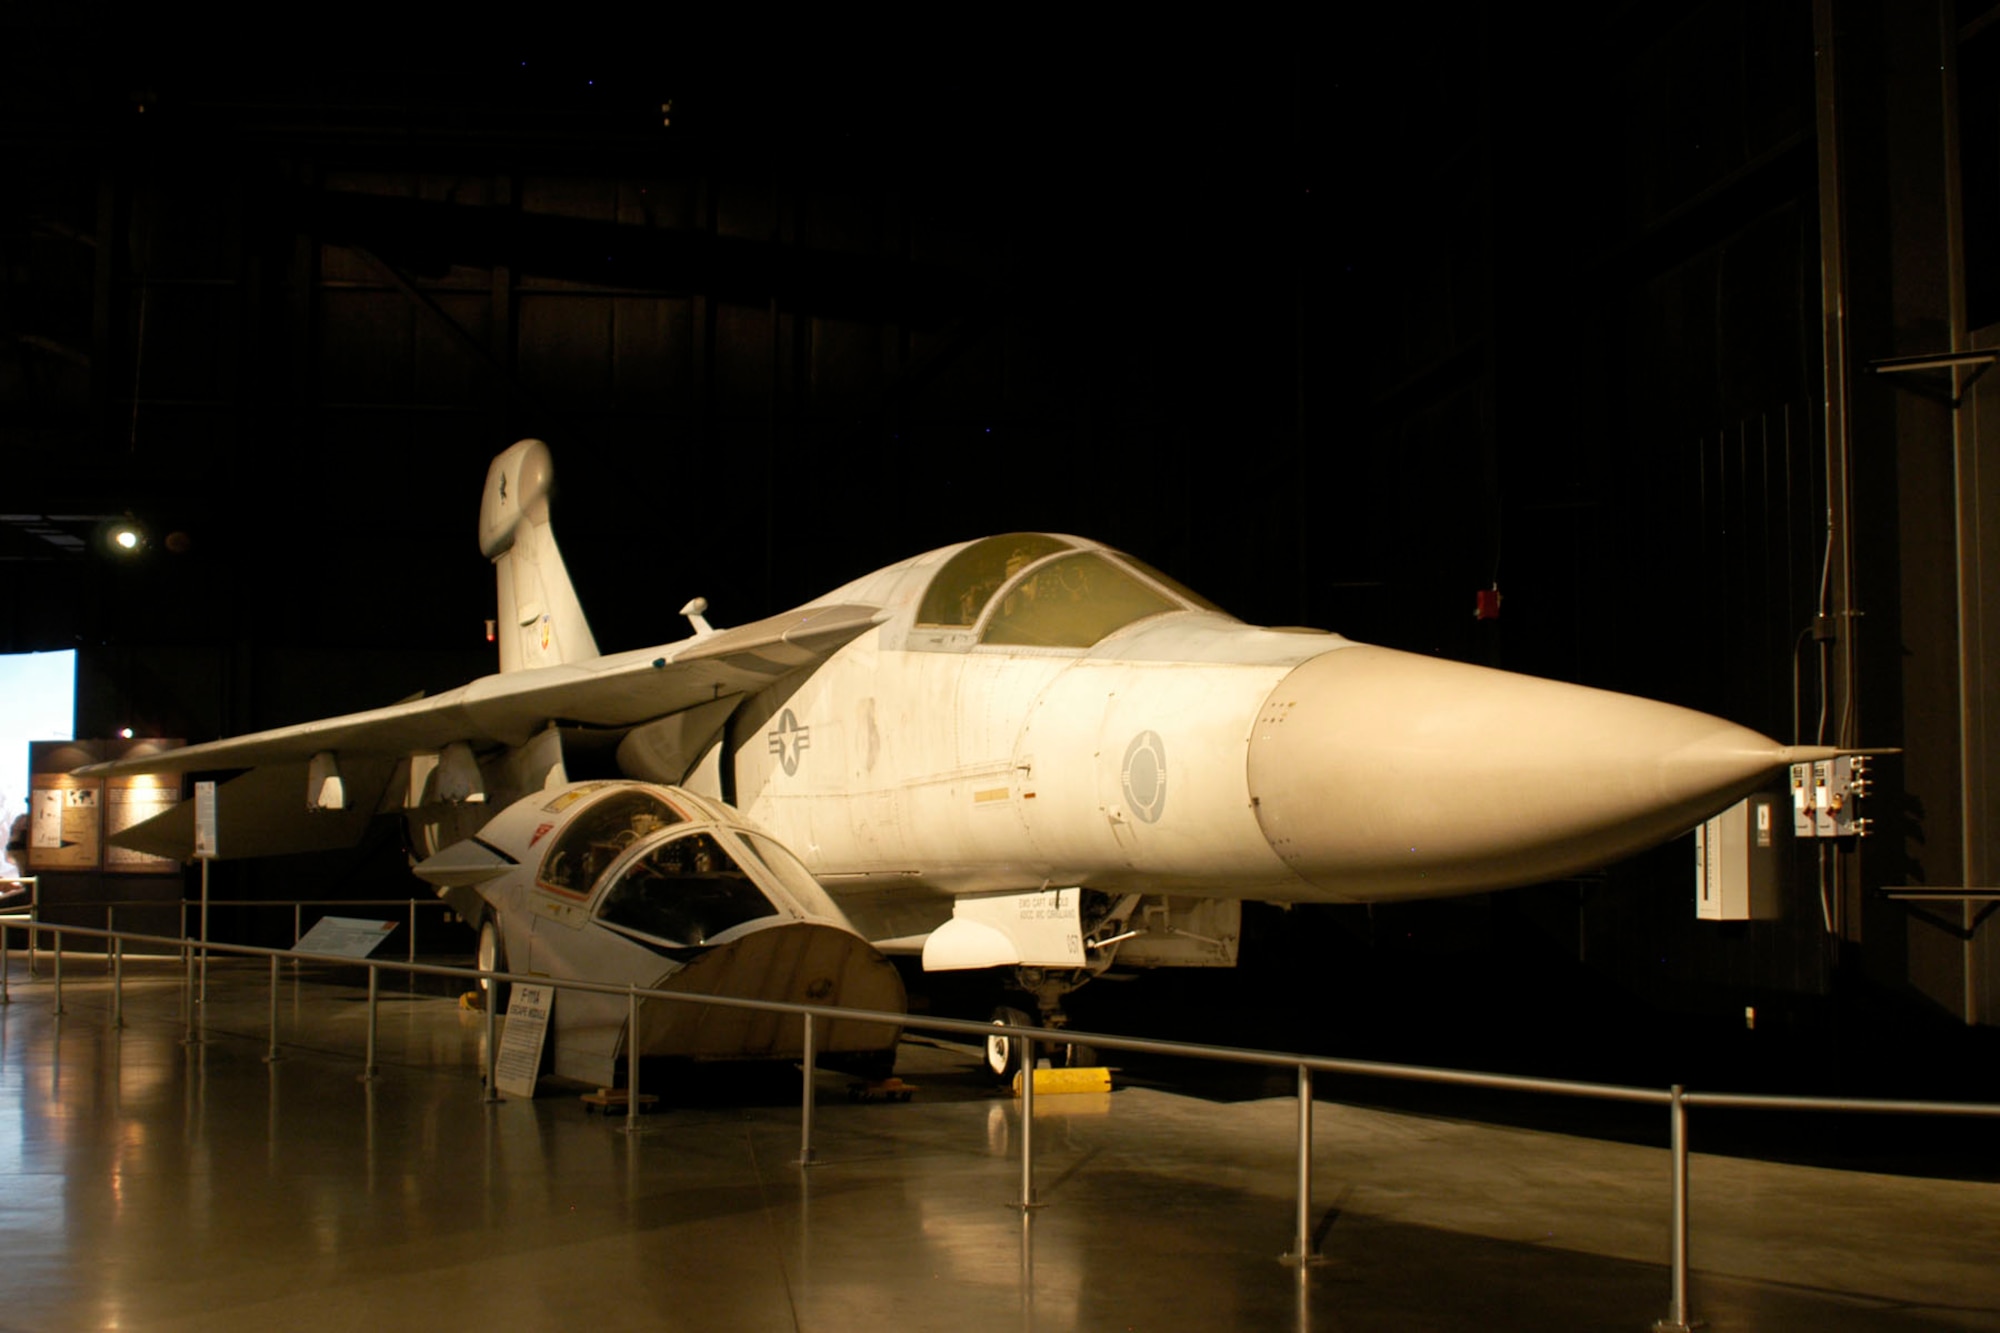 DAYTON, Ohio -- General Dynamics EF-111A Raven in the Cold War Gallery at the National Museum of the United States Air Force. (U.S. Air Force photo)